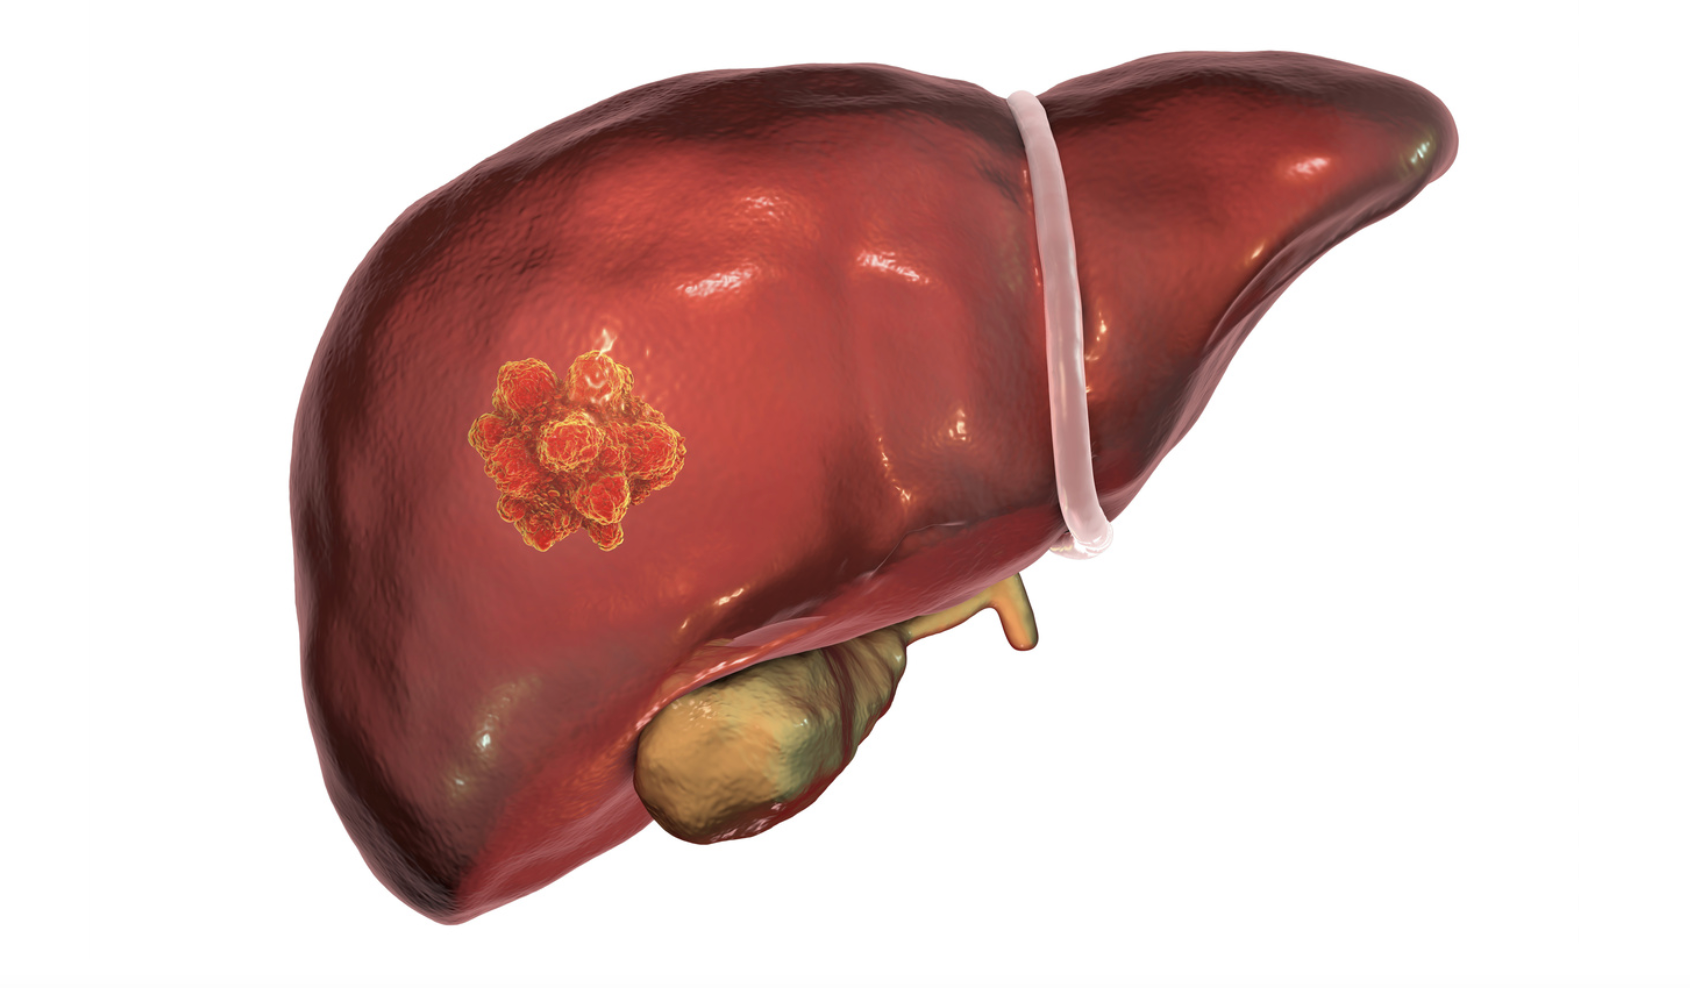 Study Finds Folfirinox is Well Tolerated, Potentially Effective in First-Line Treatment of Biliary Tract Cancer